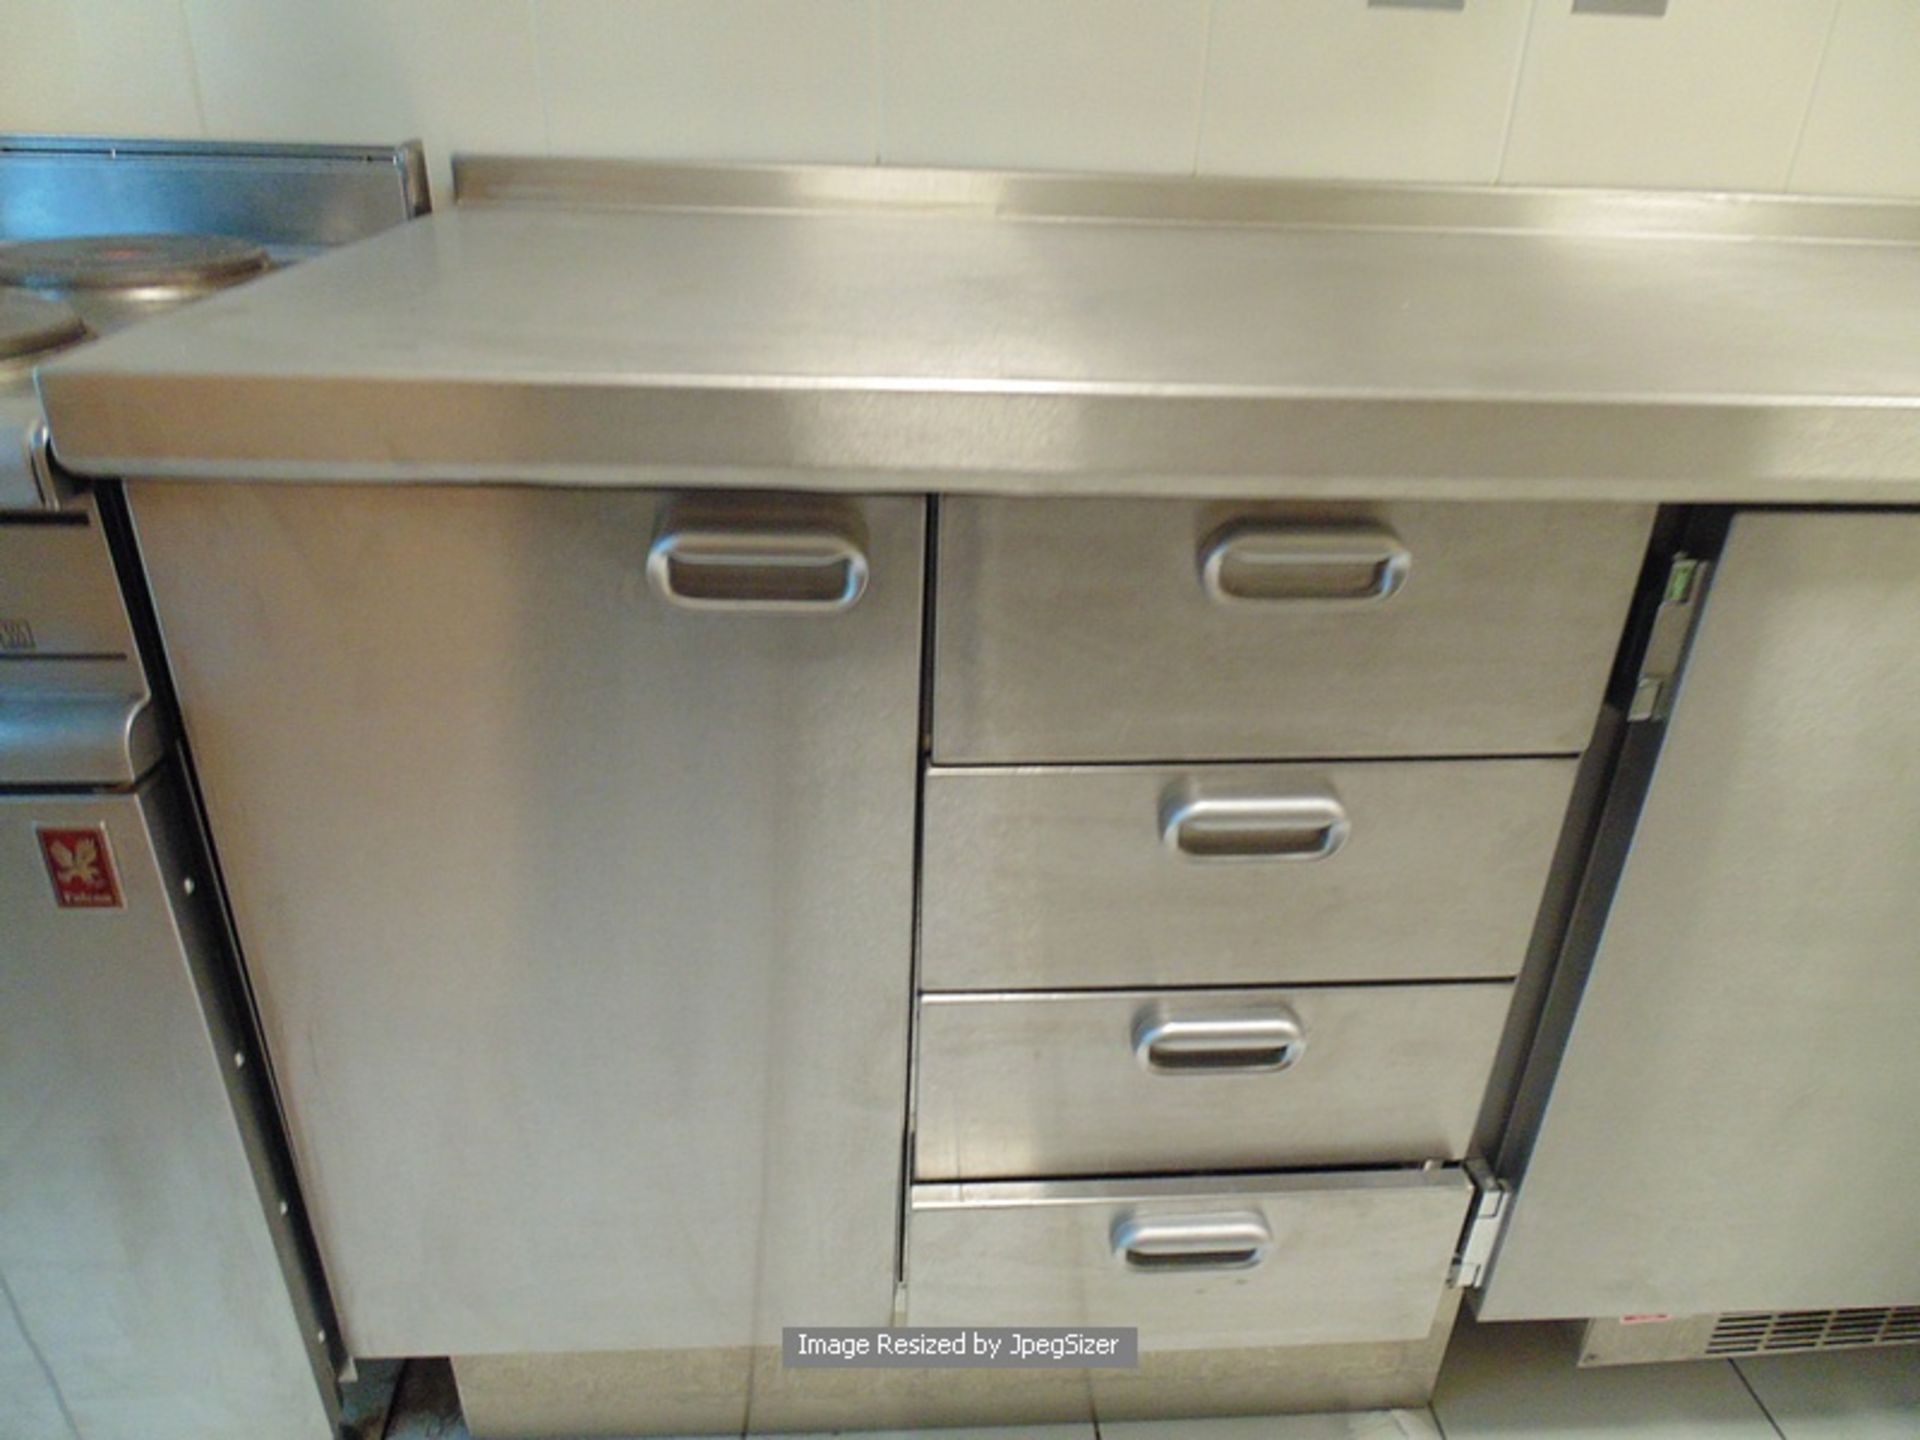 Moffat stainless steel workstation comprising of 3 x single door cupbards, 2 x 4 drawer storage - Image 3 of 4